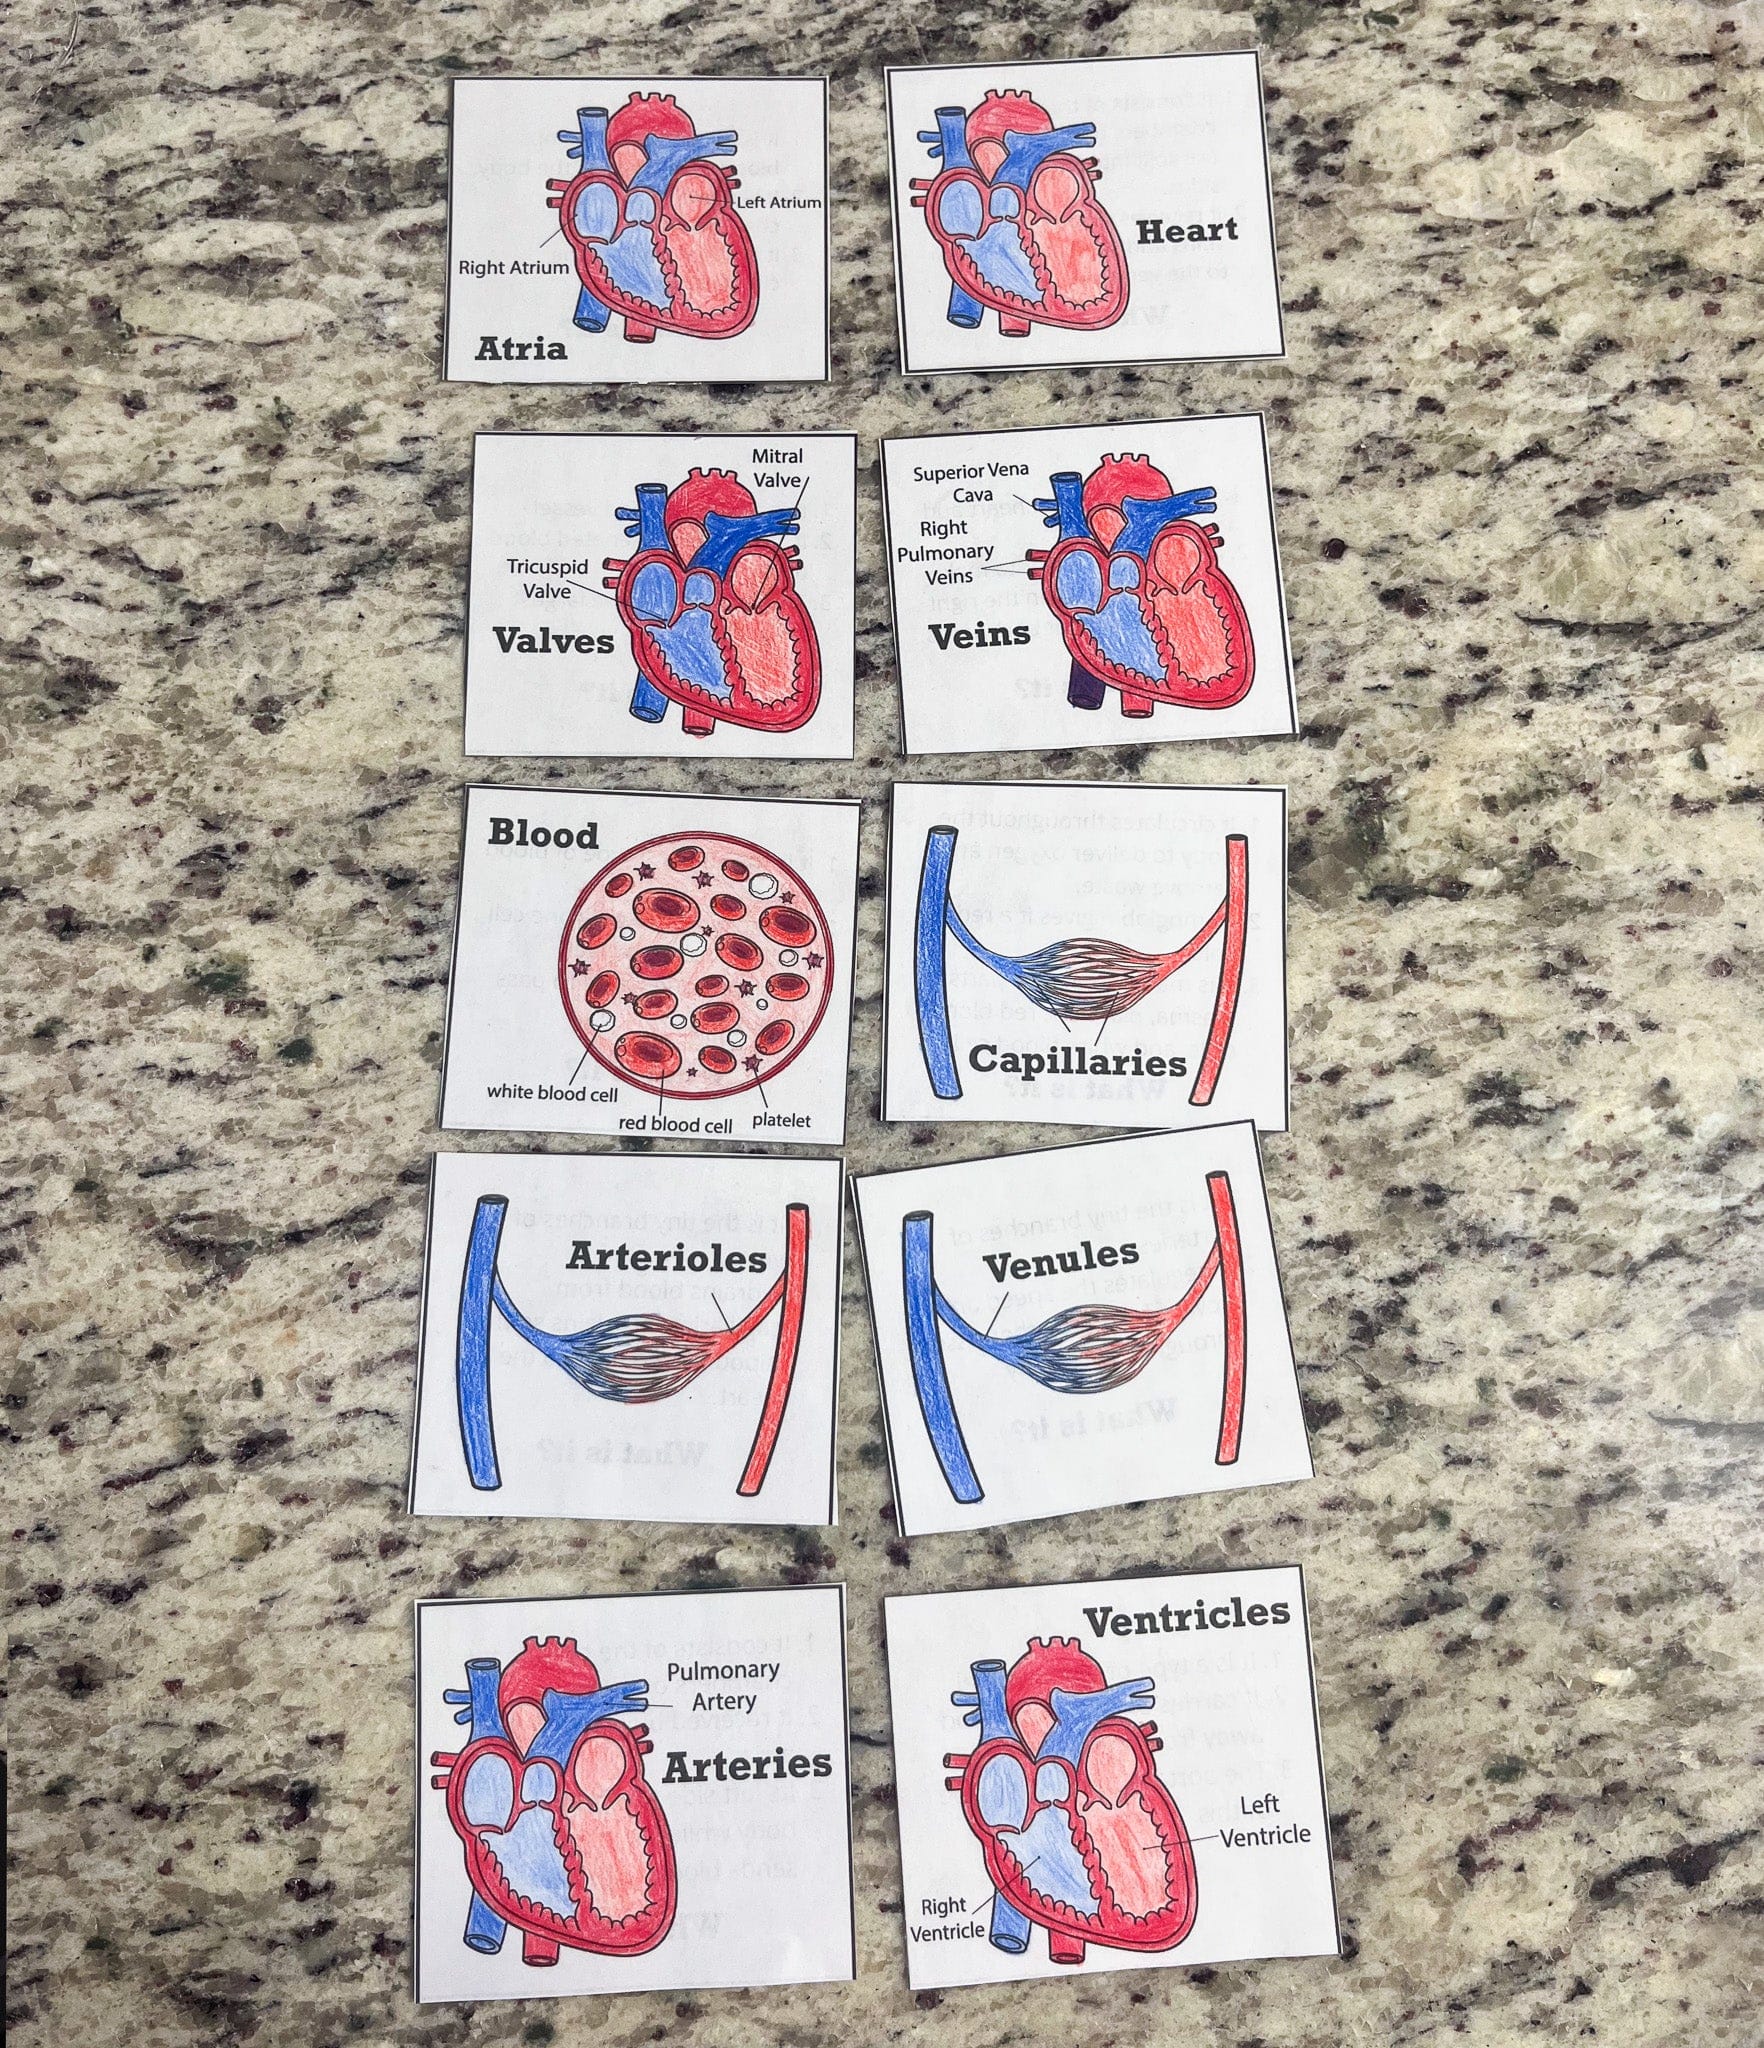 Circulatory System "What Is It?" Question Cards Health Education for Children